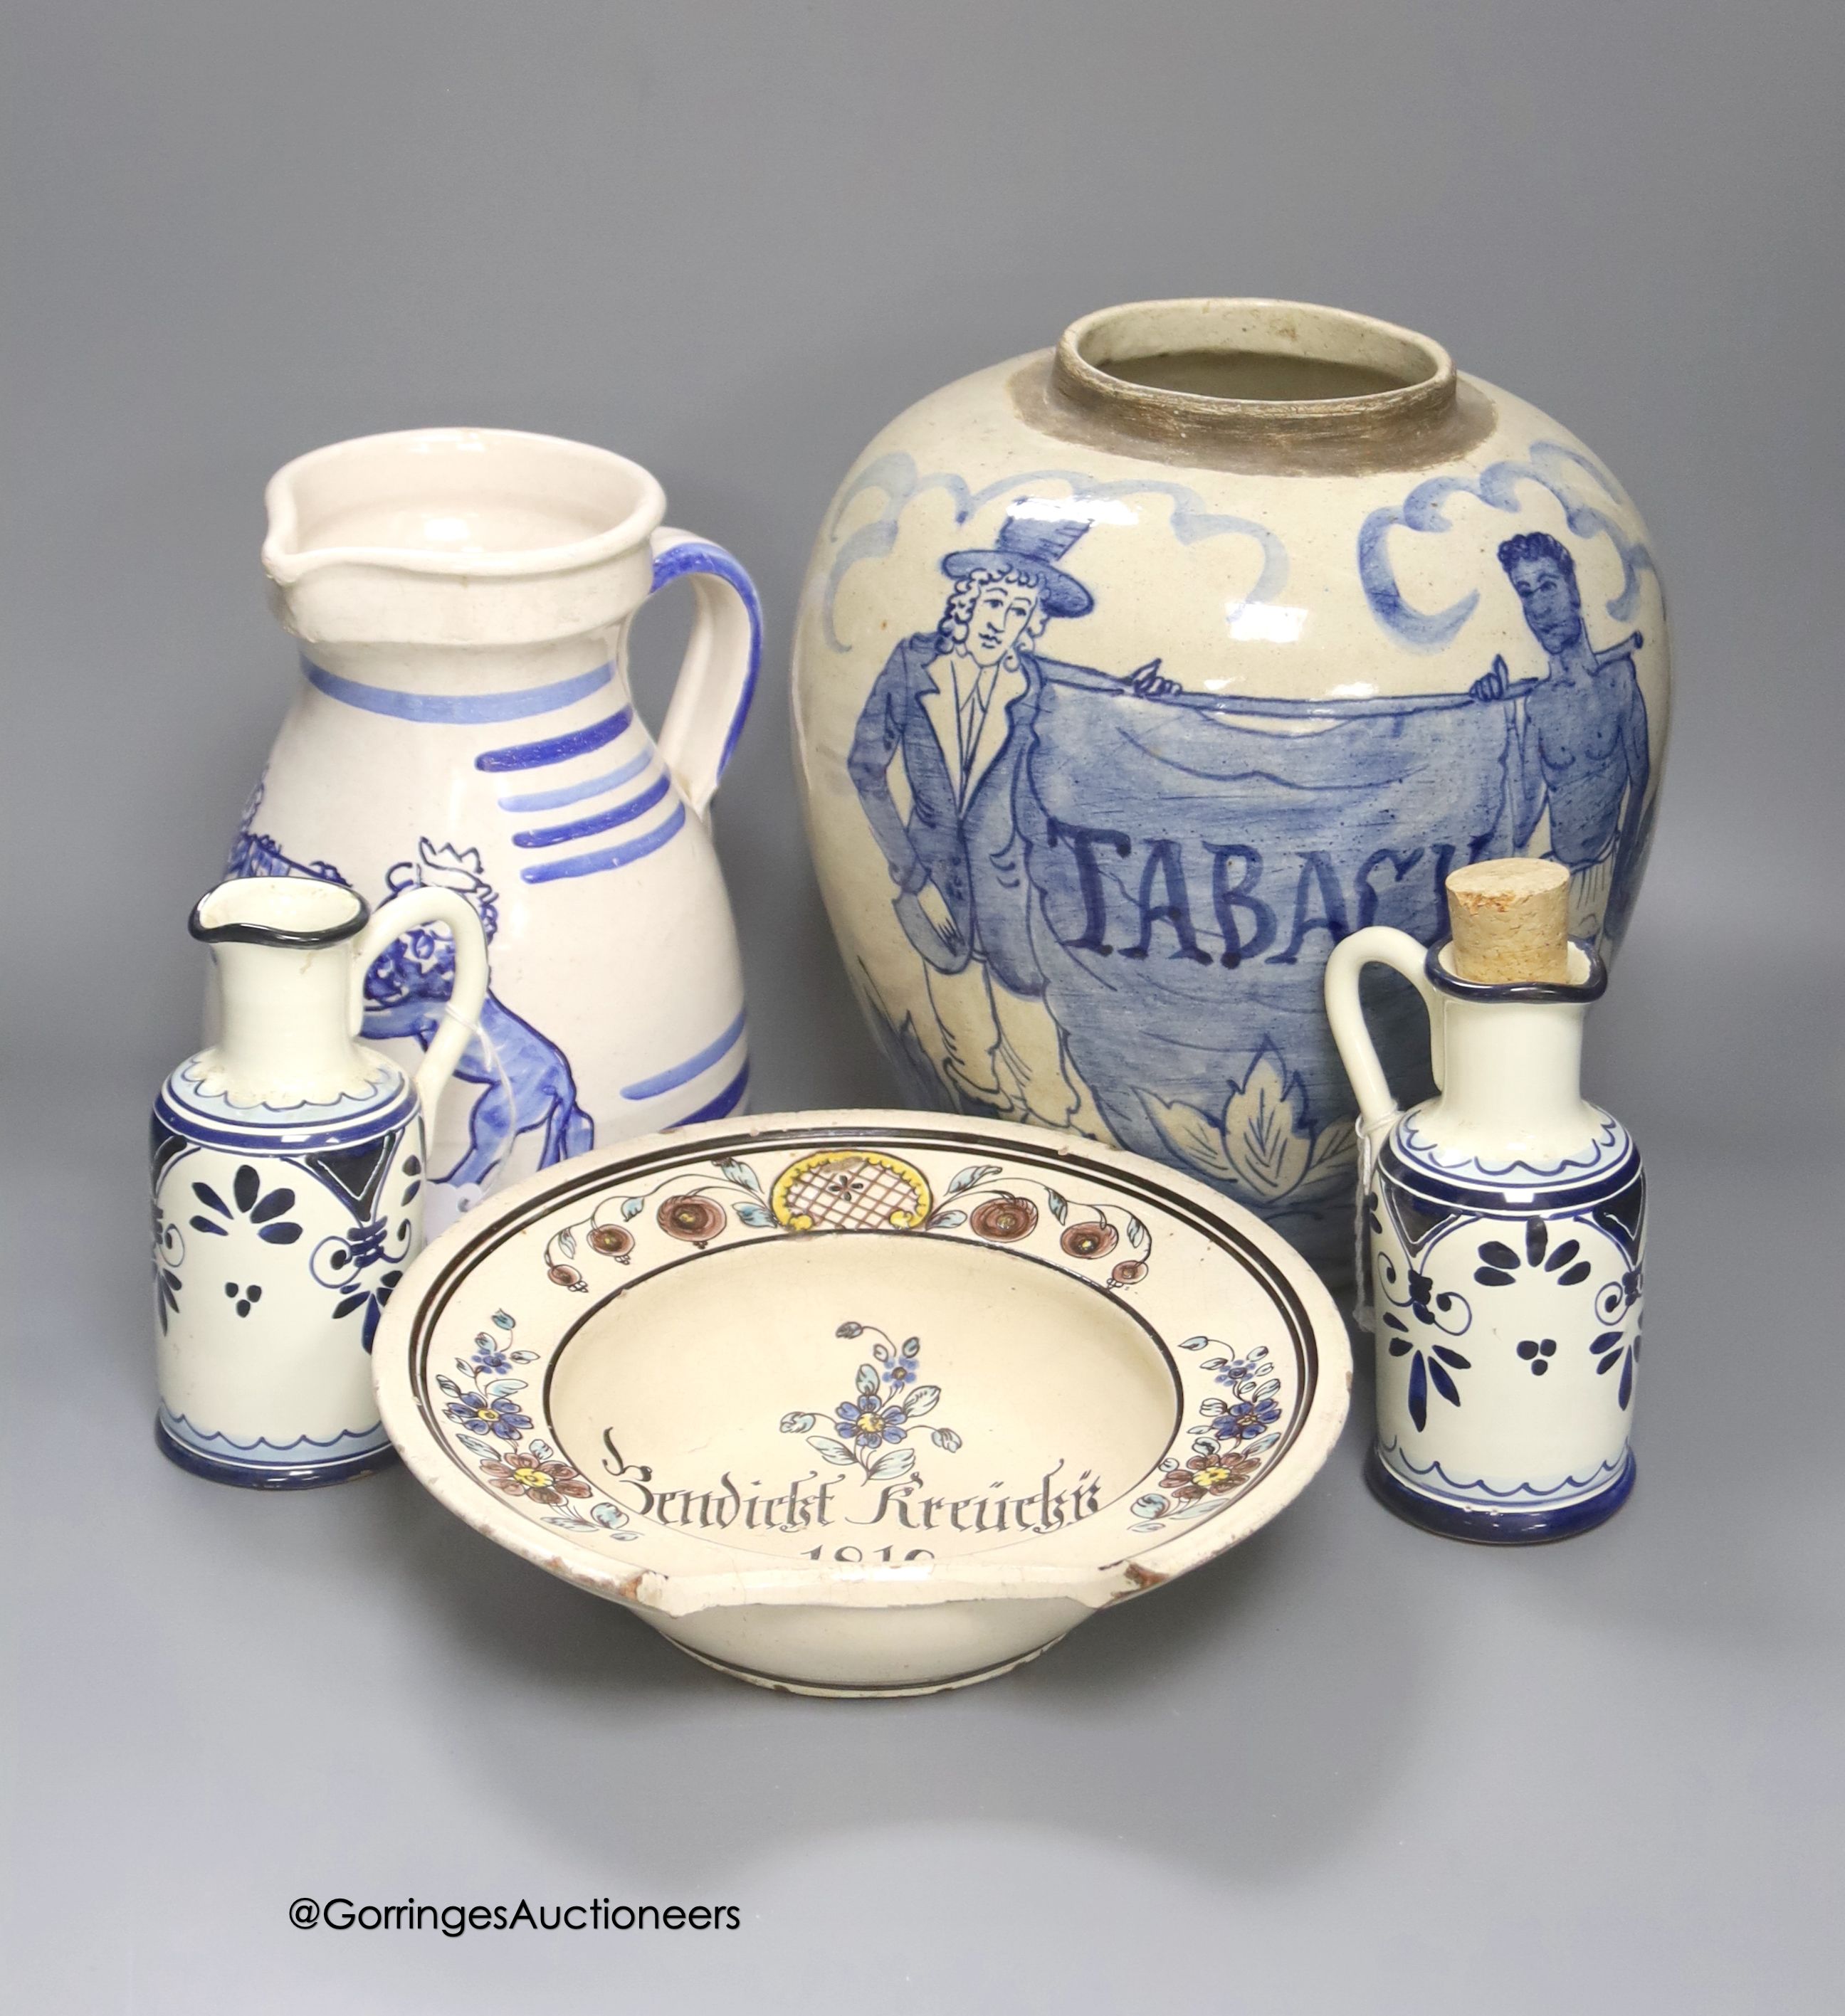 A tin-glazed terracotta barber's bowl dated 1819, a large ovoid eathenware ‘Taback’ jar and three earthenware jugs